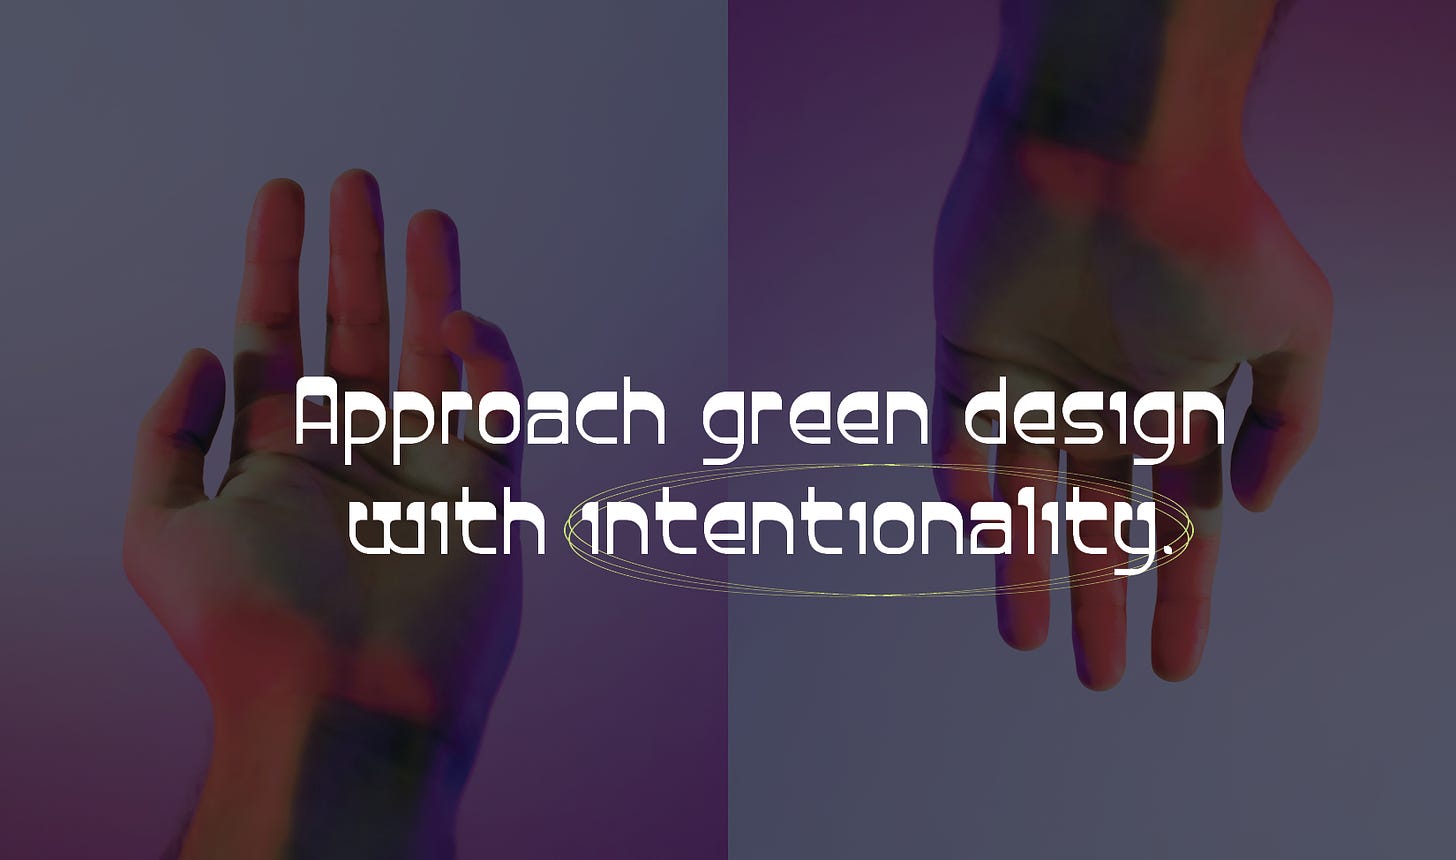 Approach green design with intentionality